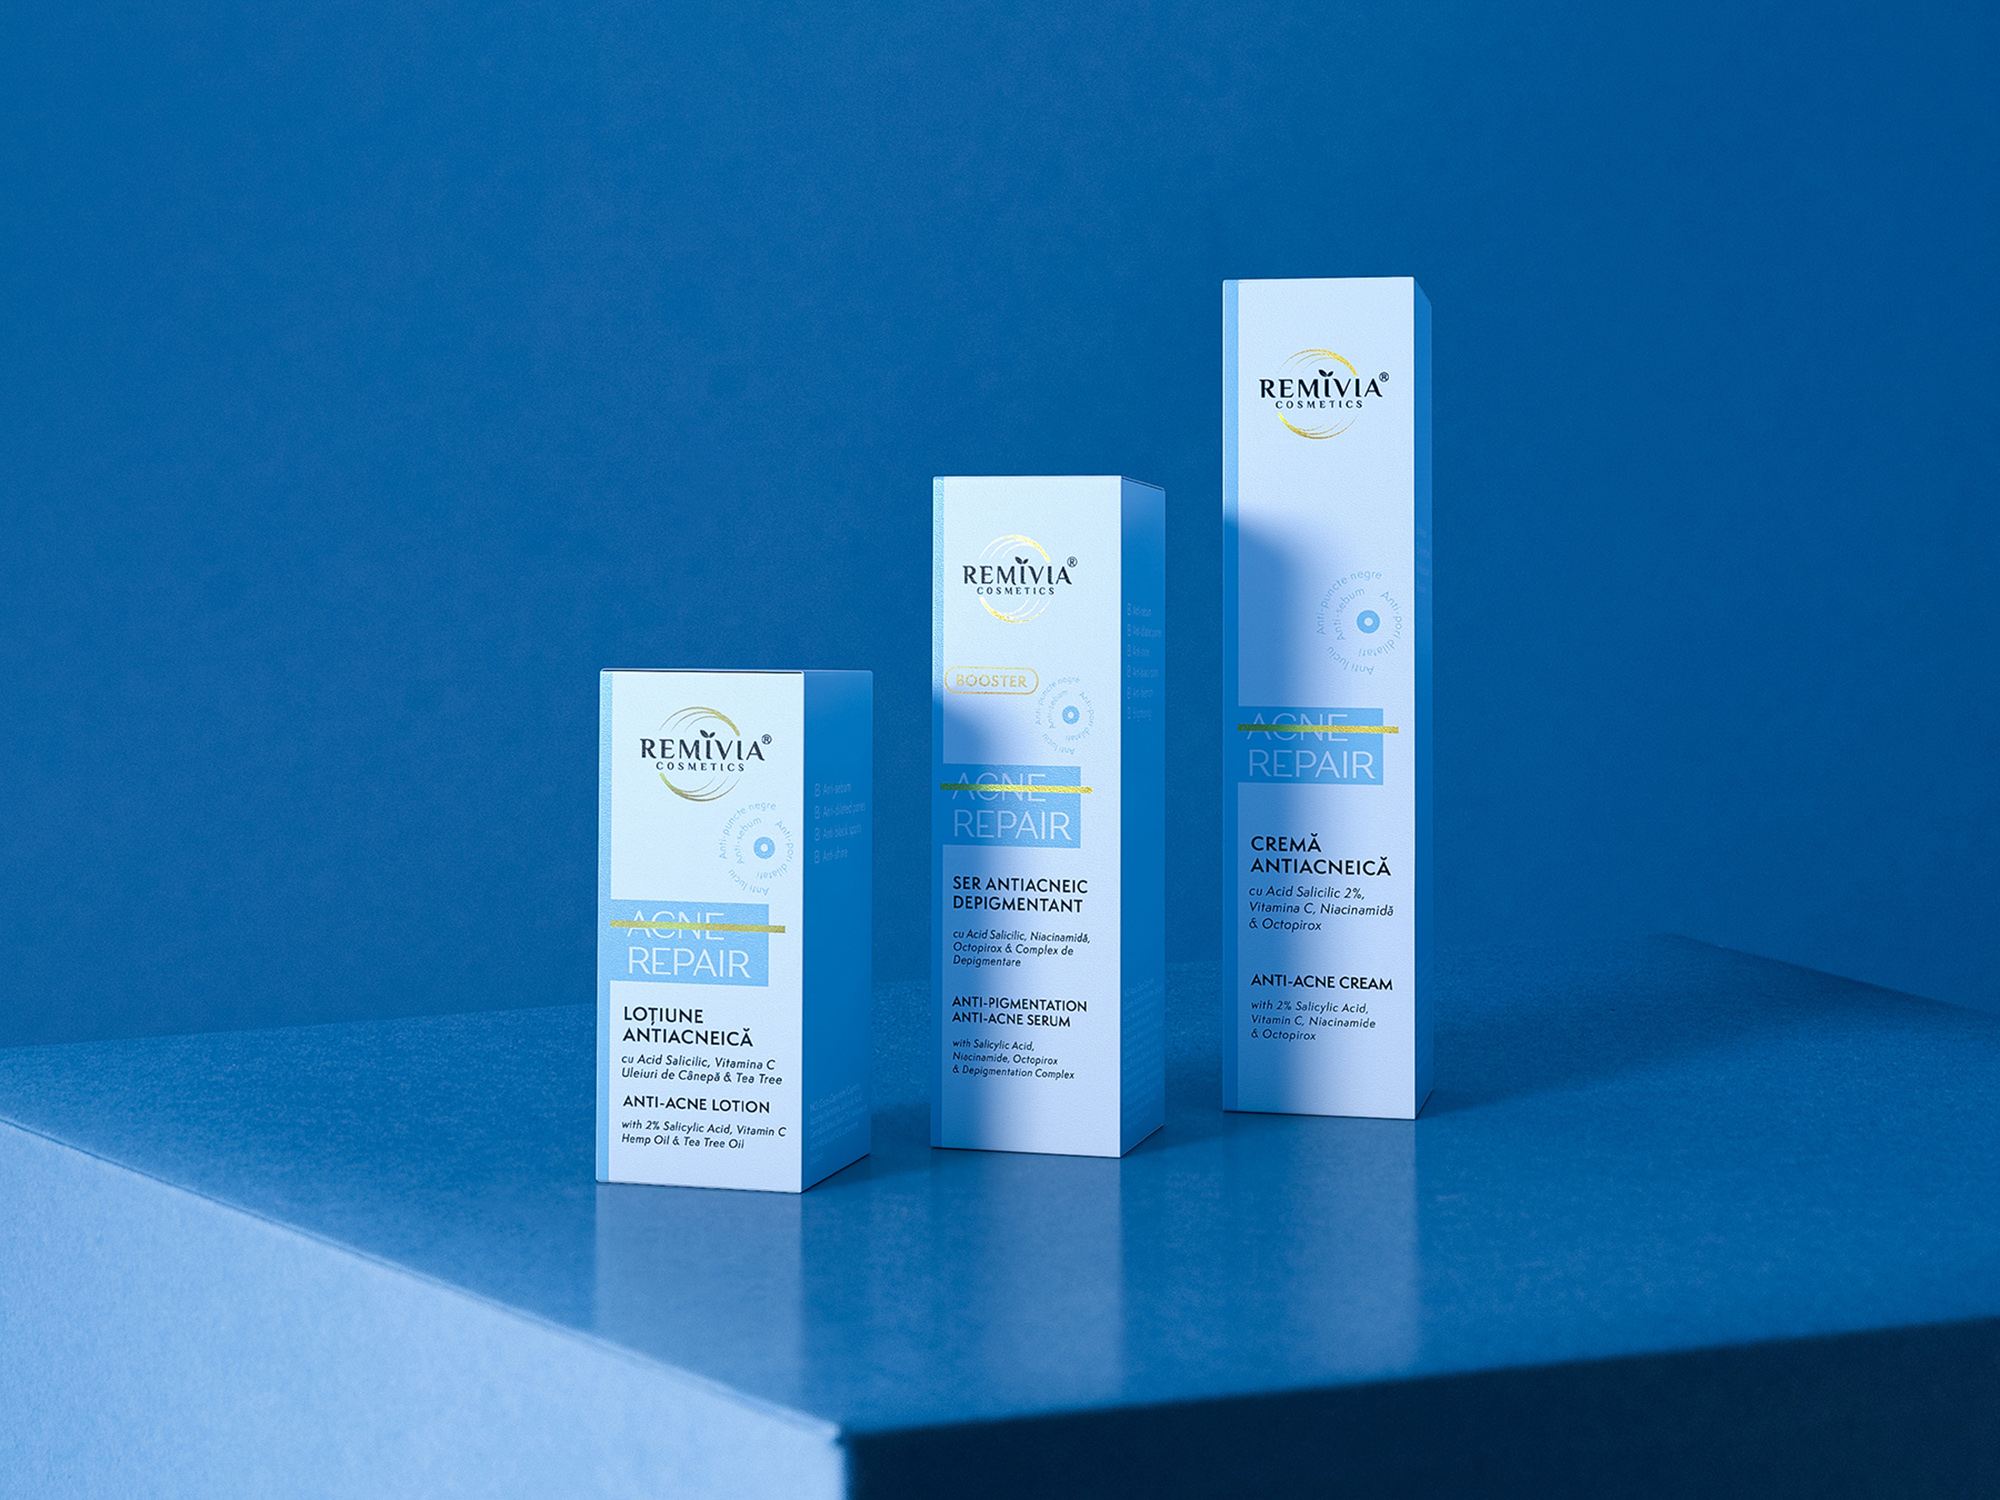 Minimalist, Acne Repair Line for Remivia Cosmetics by Branding Agency Acclamé